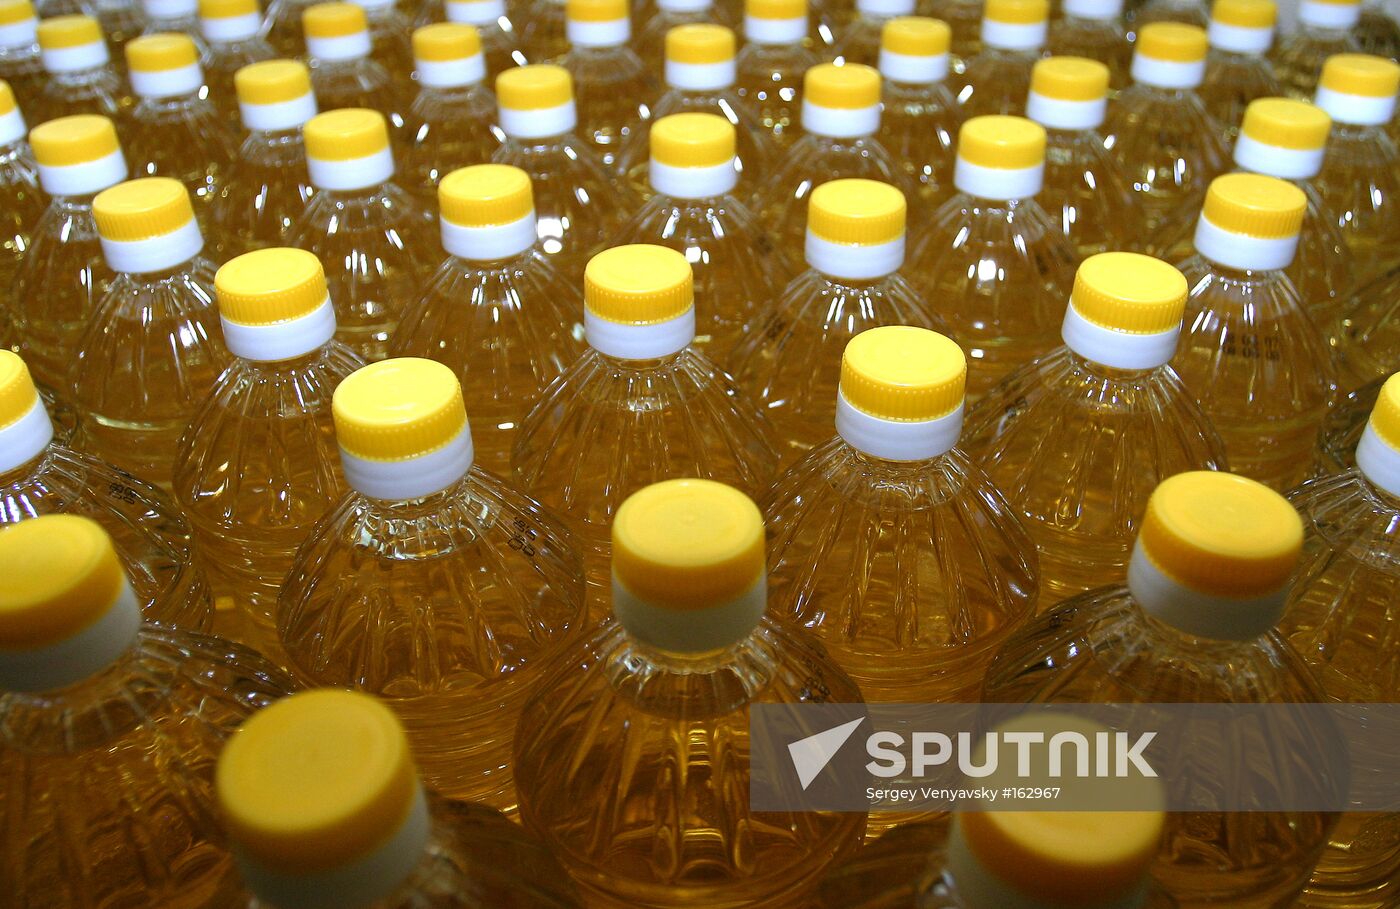 PRODUCTION OF SUNFLOWER OIL